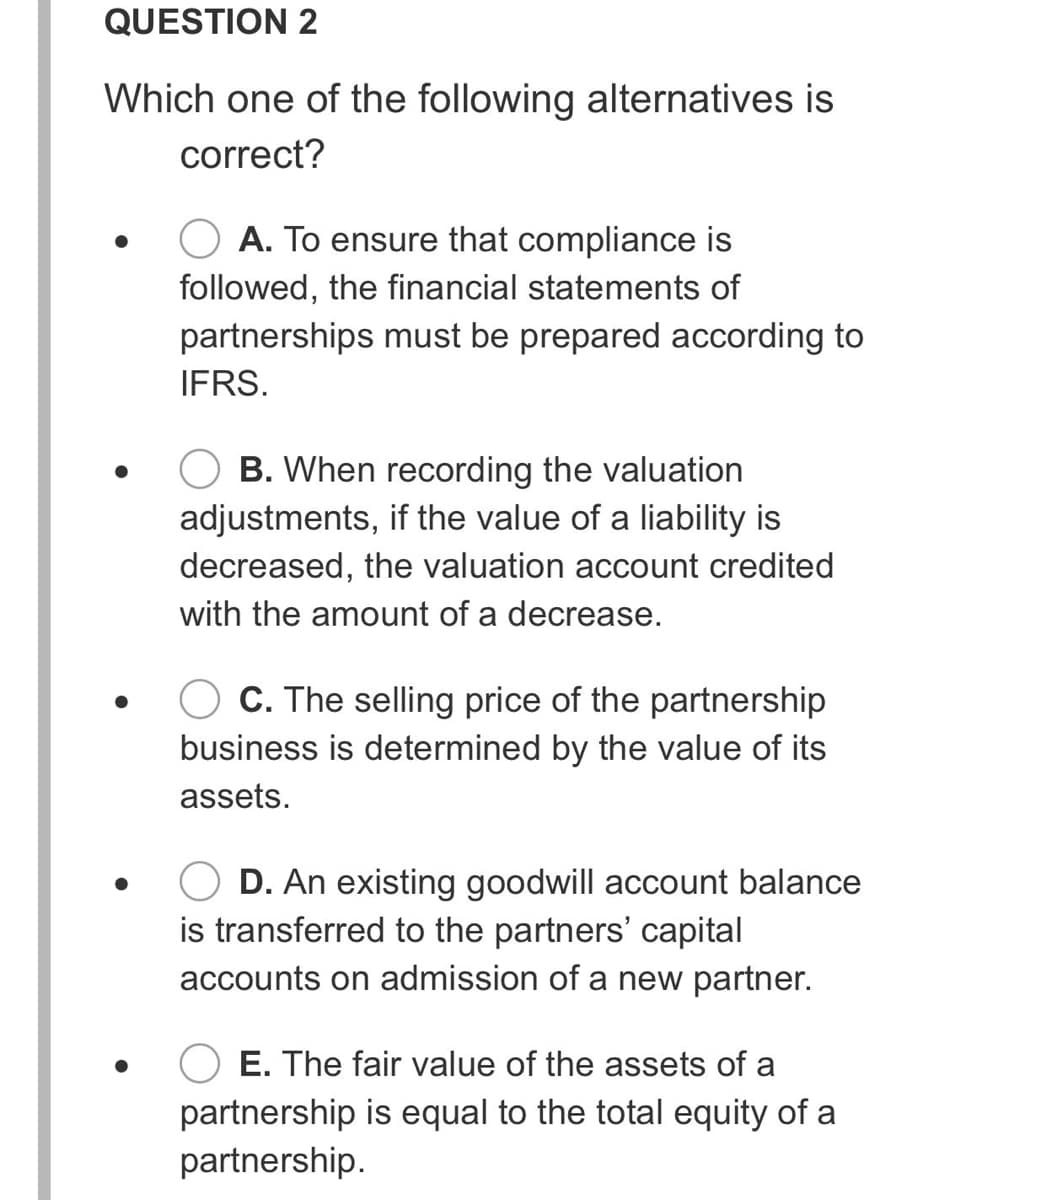 QUESTION 2
Which one of the following alternatives is
correct?
A. To ensure that compliance is
followed, the financial statements of
partnerships must be prepared according to
IFRS.
B. When recording the valuation
adjustments, if the value of a liability is
decreased, the valuation account credited
with the amount of a decrease.
C. The selling price of the partnership
business is determined by the value of its
assets.
D. An existing goodwill account balance
is transferred to the partners' capital
accounts on admission of a new partner.
E. The fair value of the assets of a
partnership is equal to the total equity of a
partnership.
